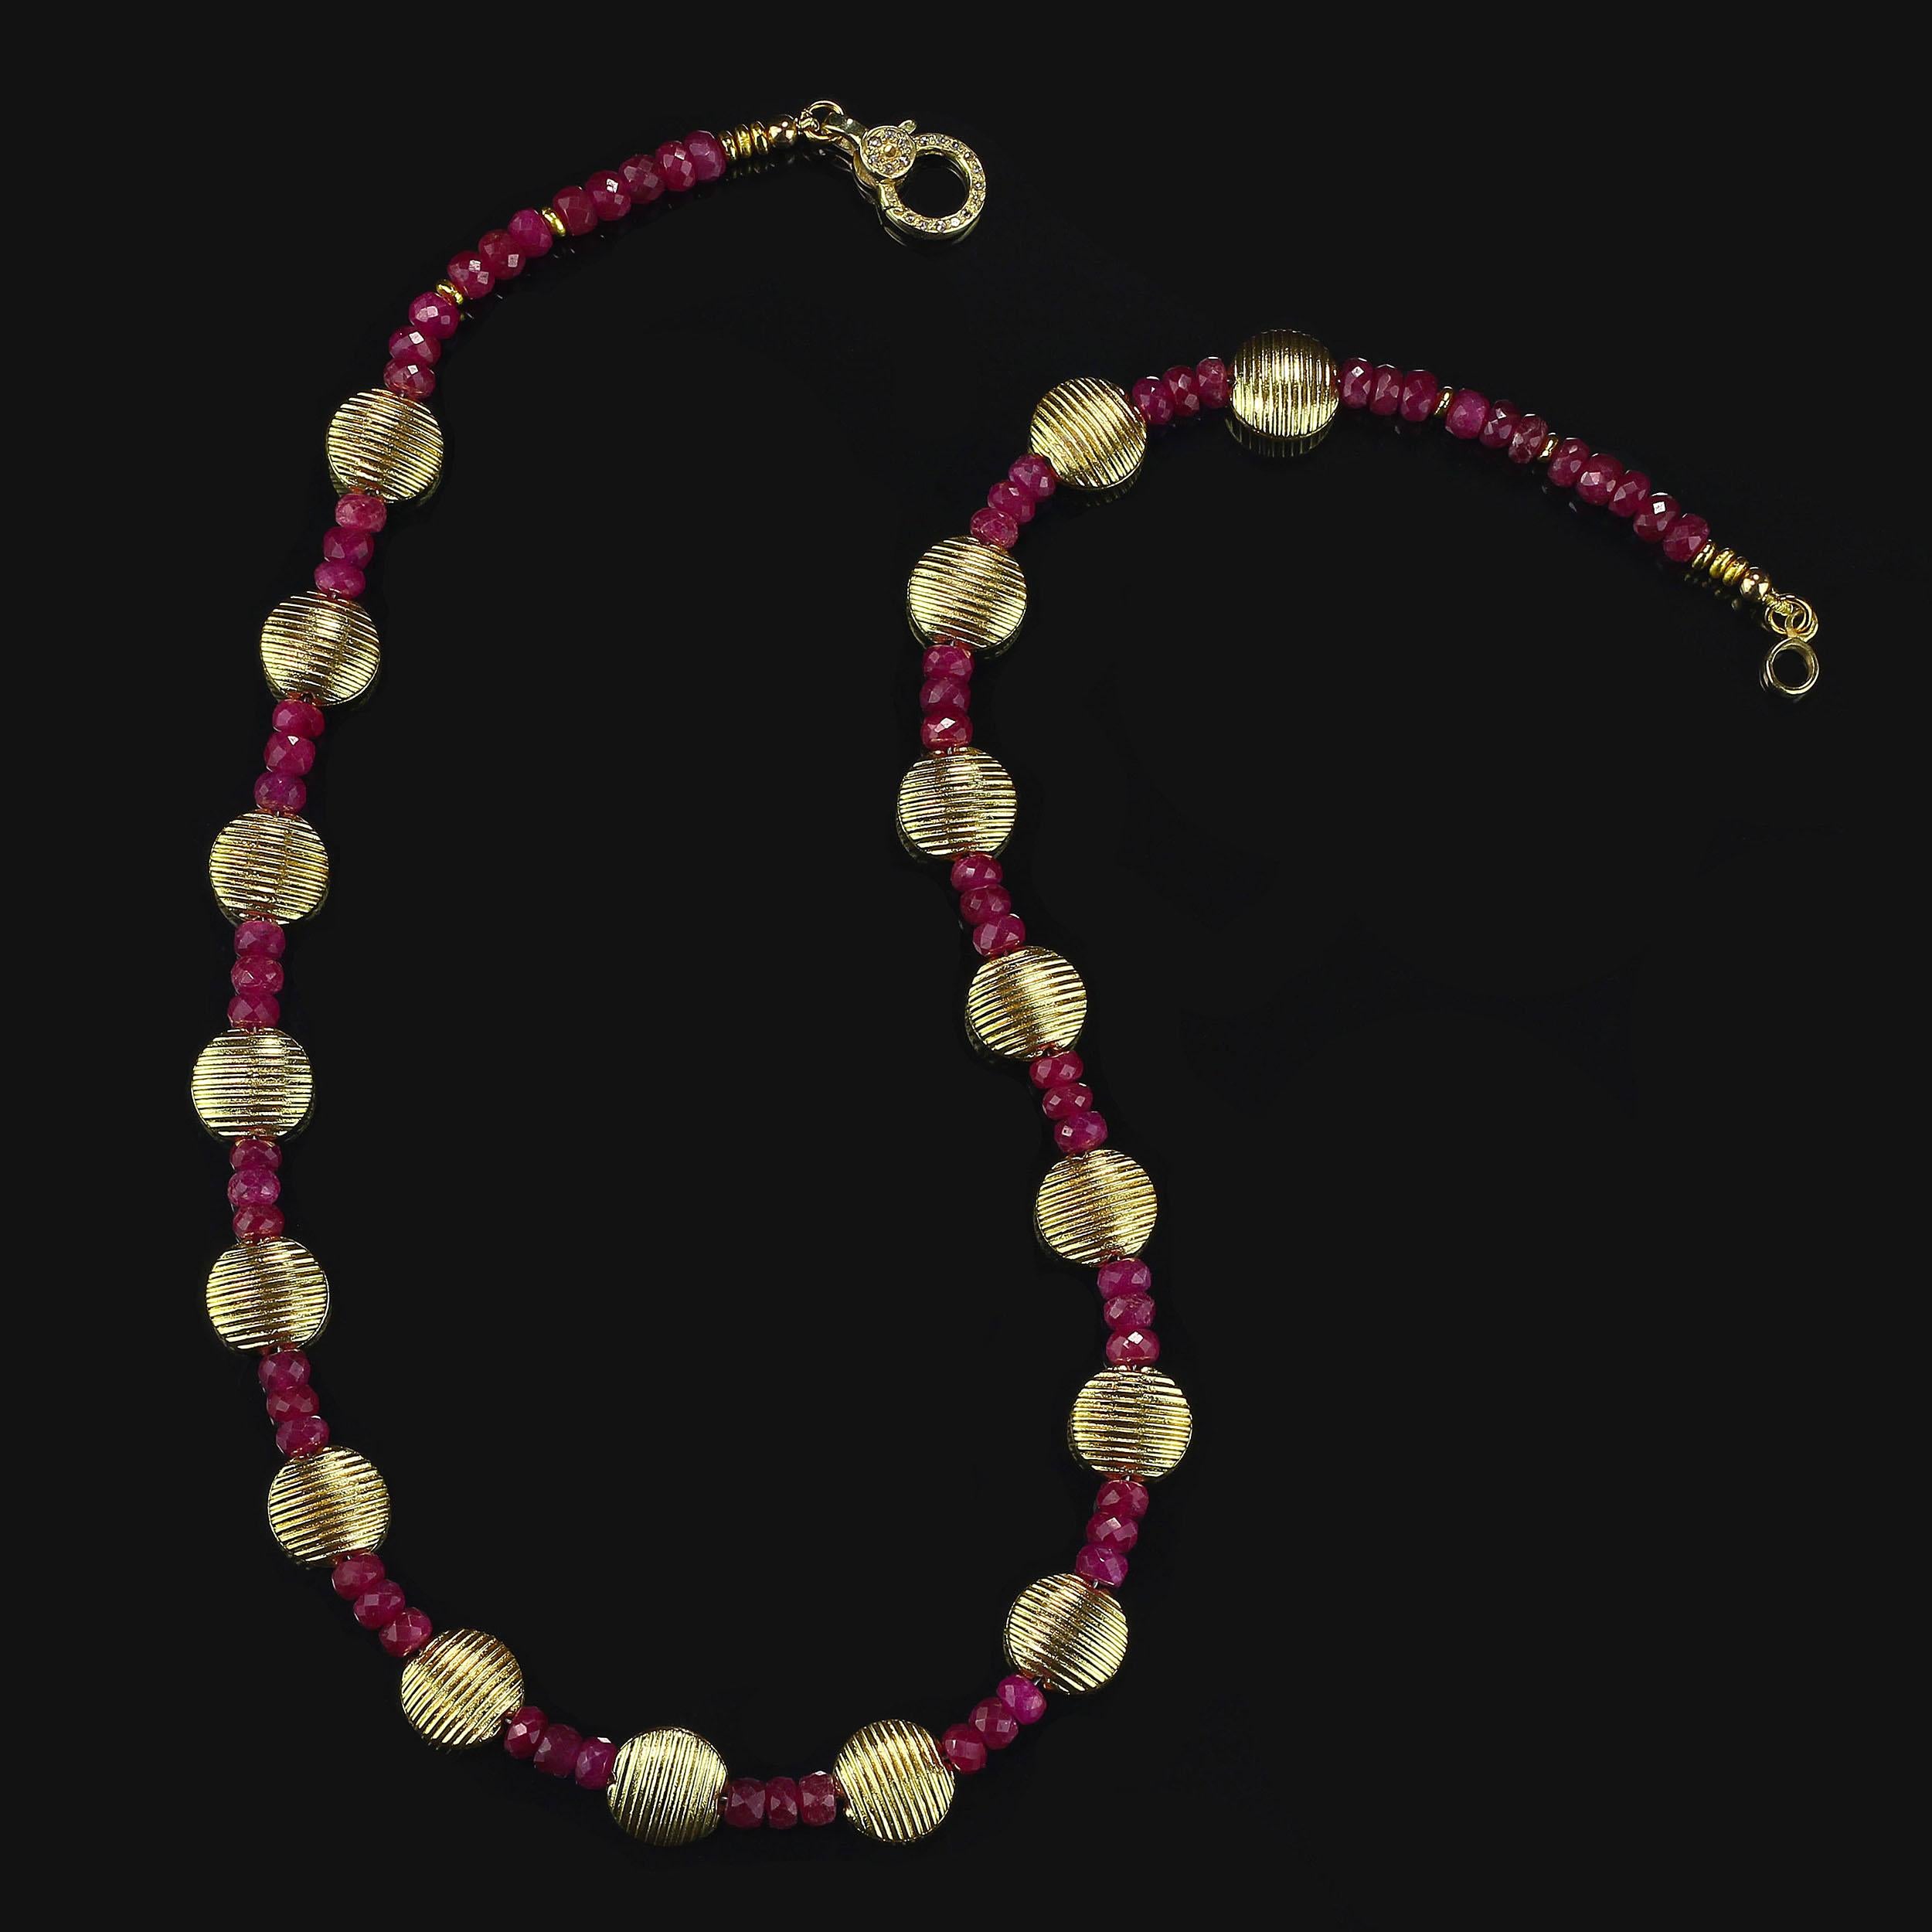  AJD 17 Inch Ruby and Gold Choker Necklace 2